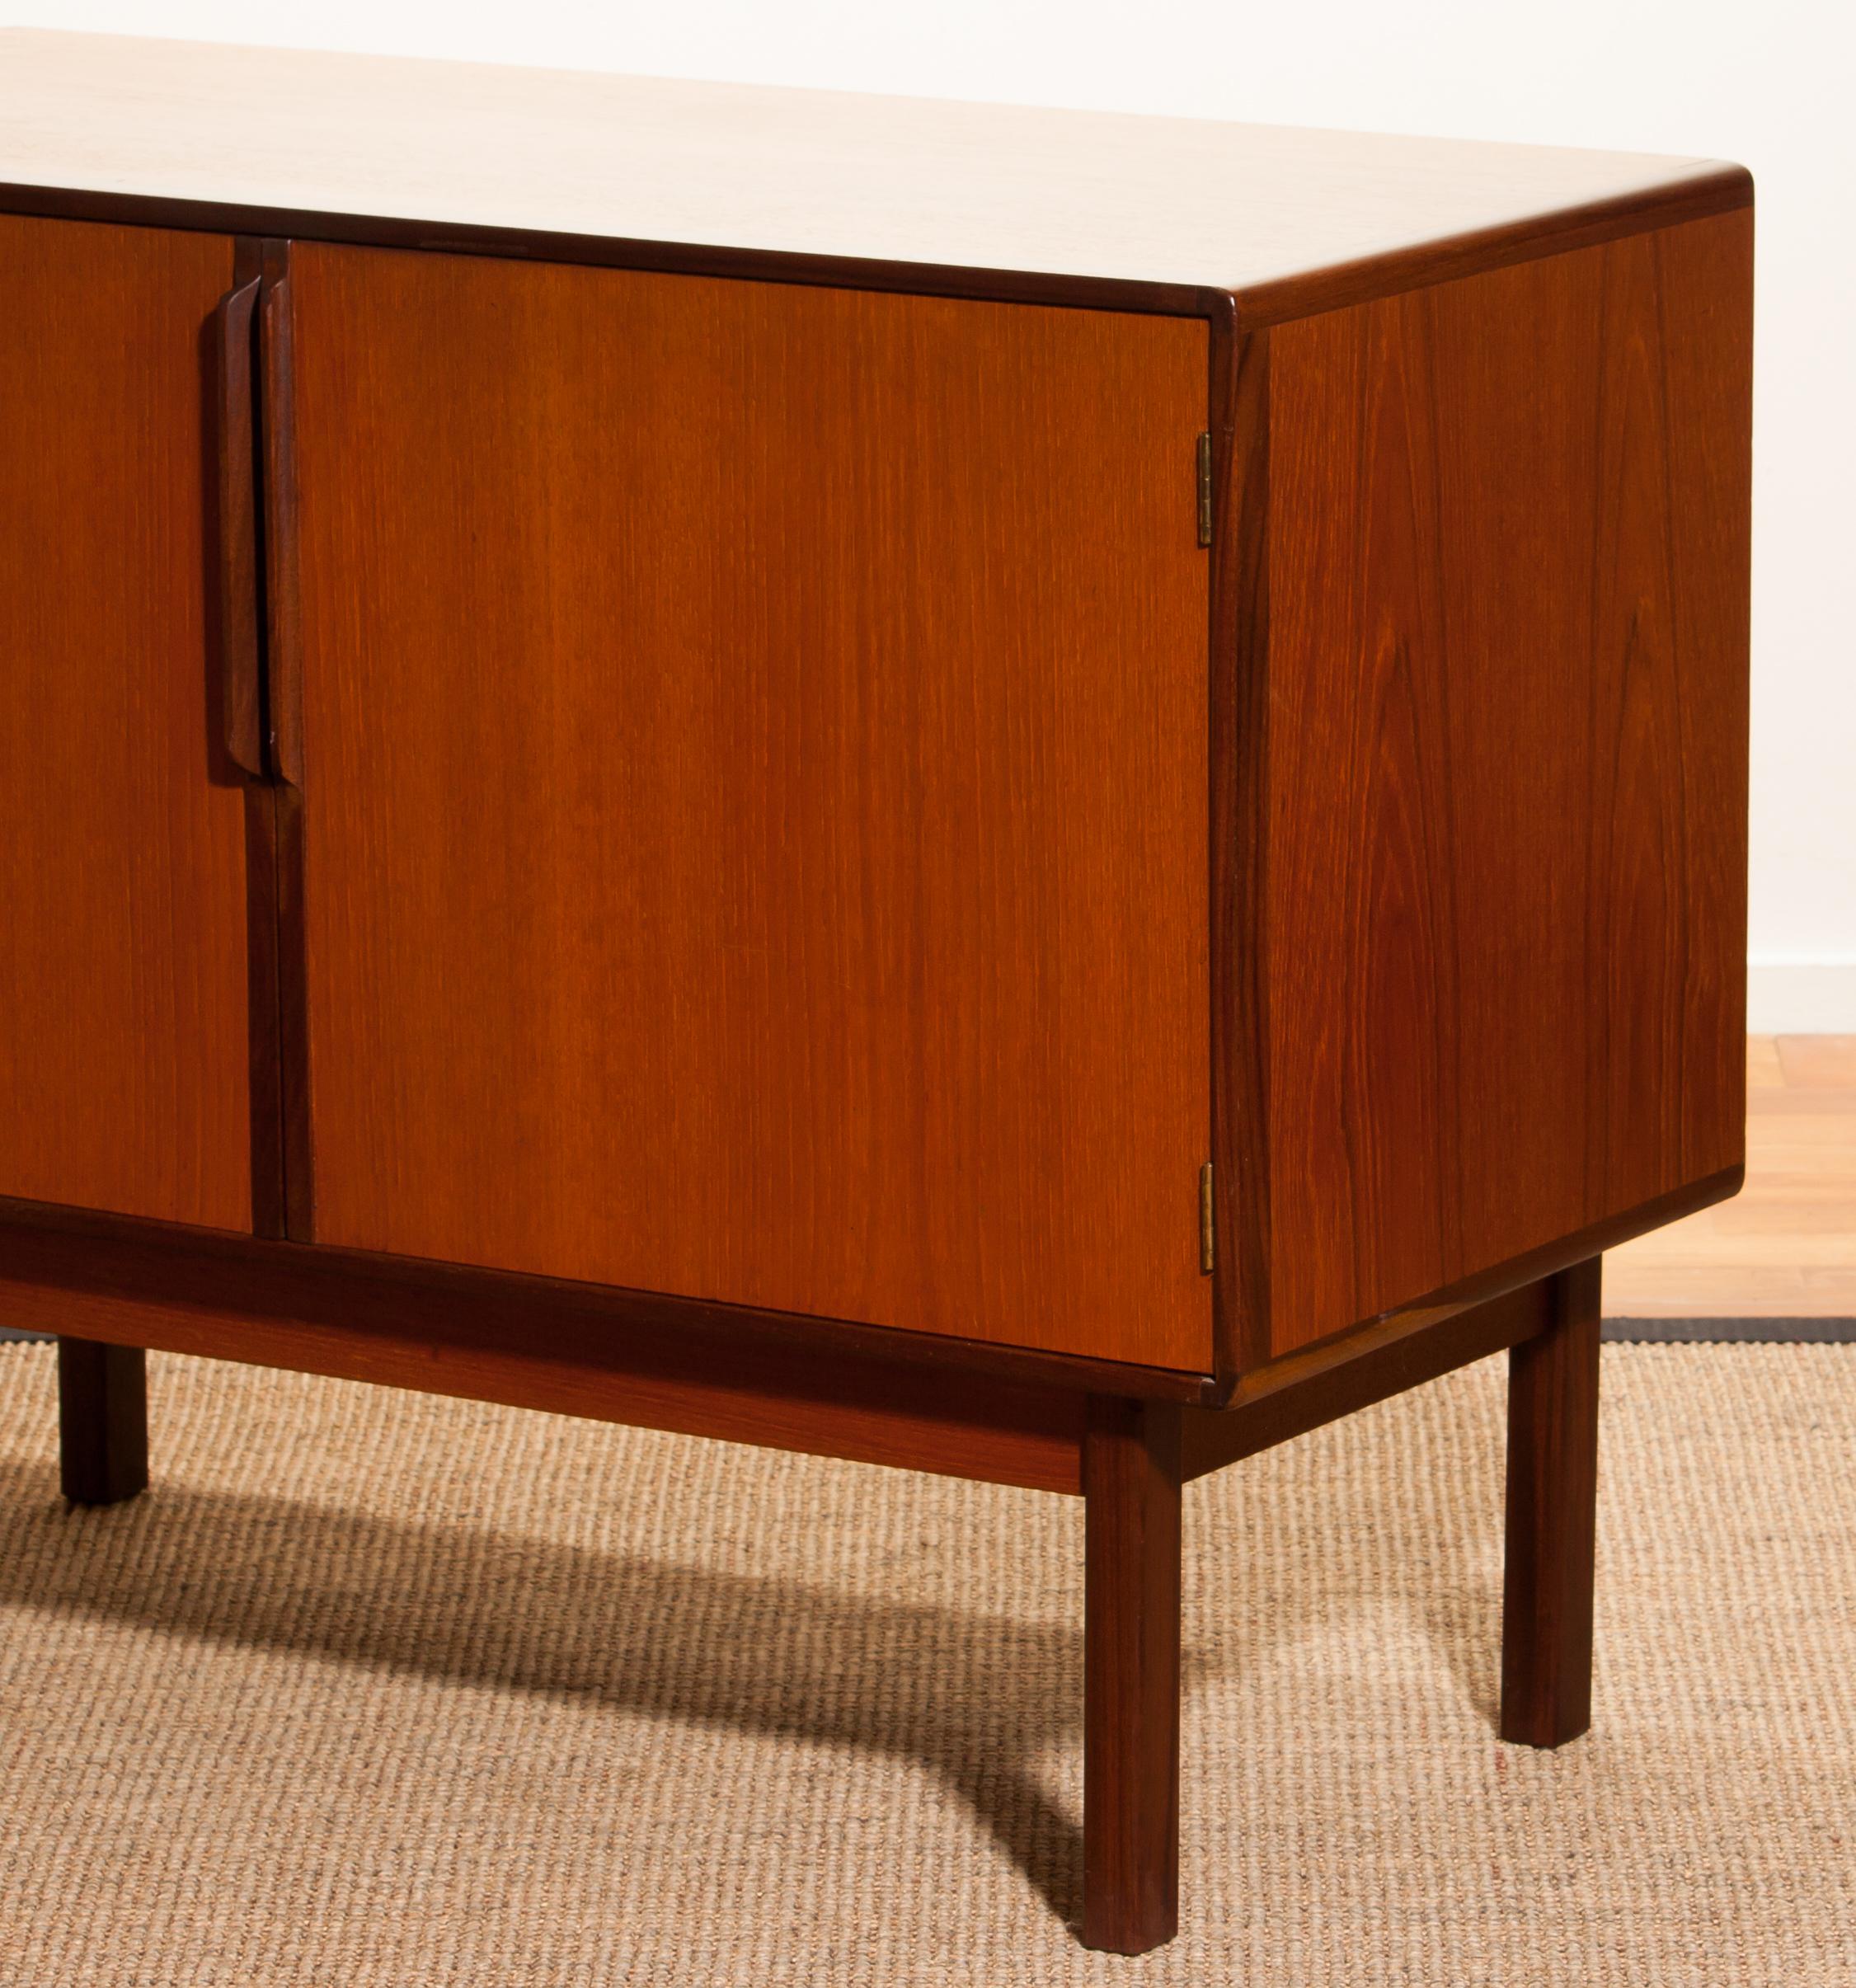 Finnish 1960s, Teak and Walnut Small Sideboard Cabinet by Asko Finland